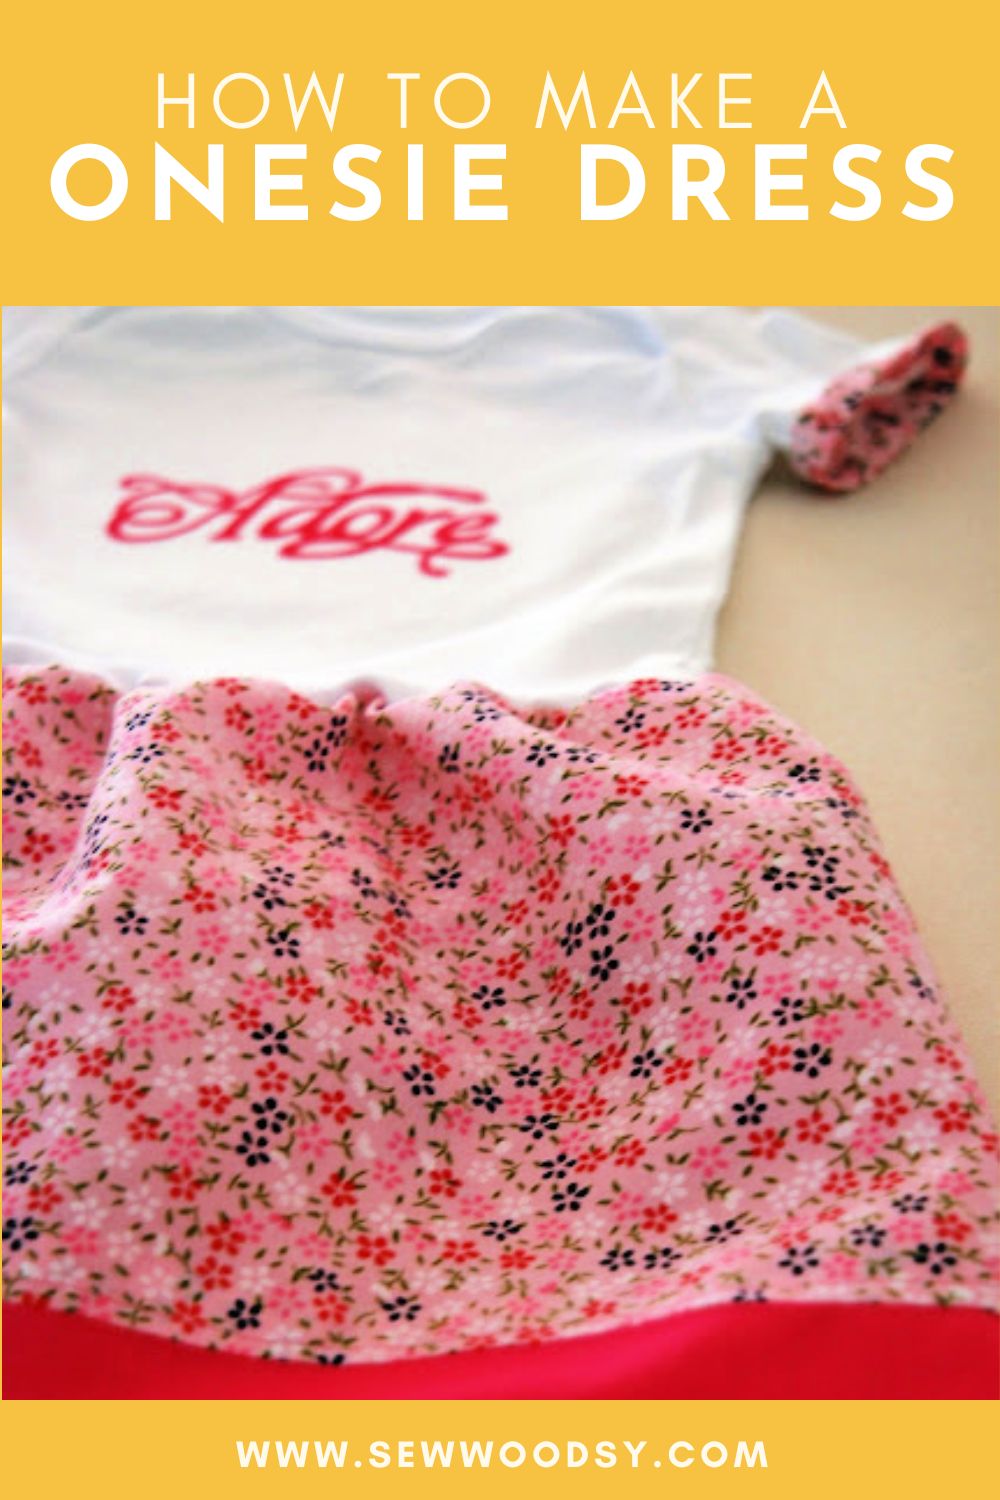 White onesie with the word "adore" on it with pink floral fabric with text on image for Pinterest.